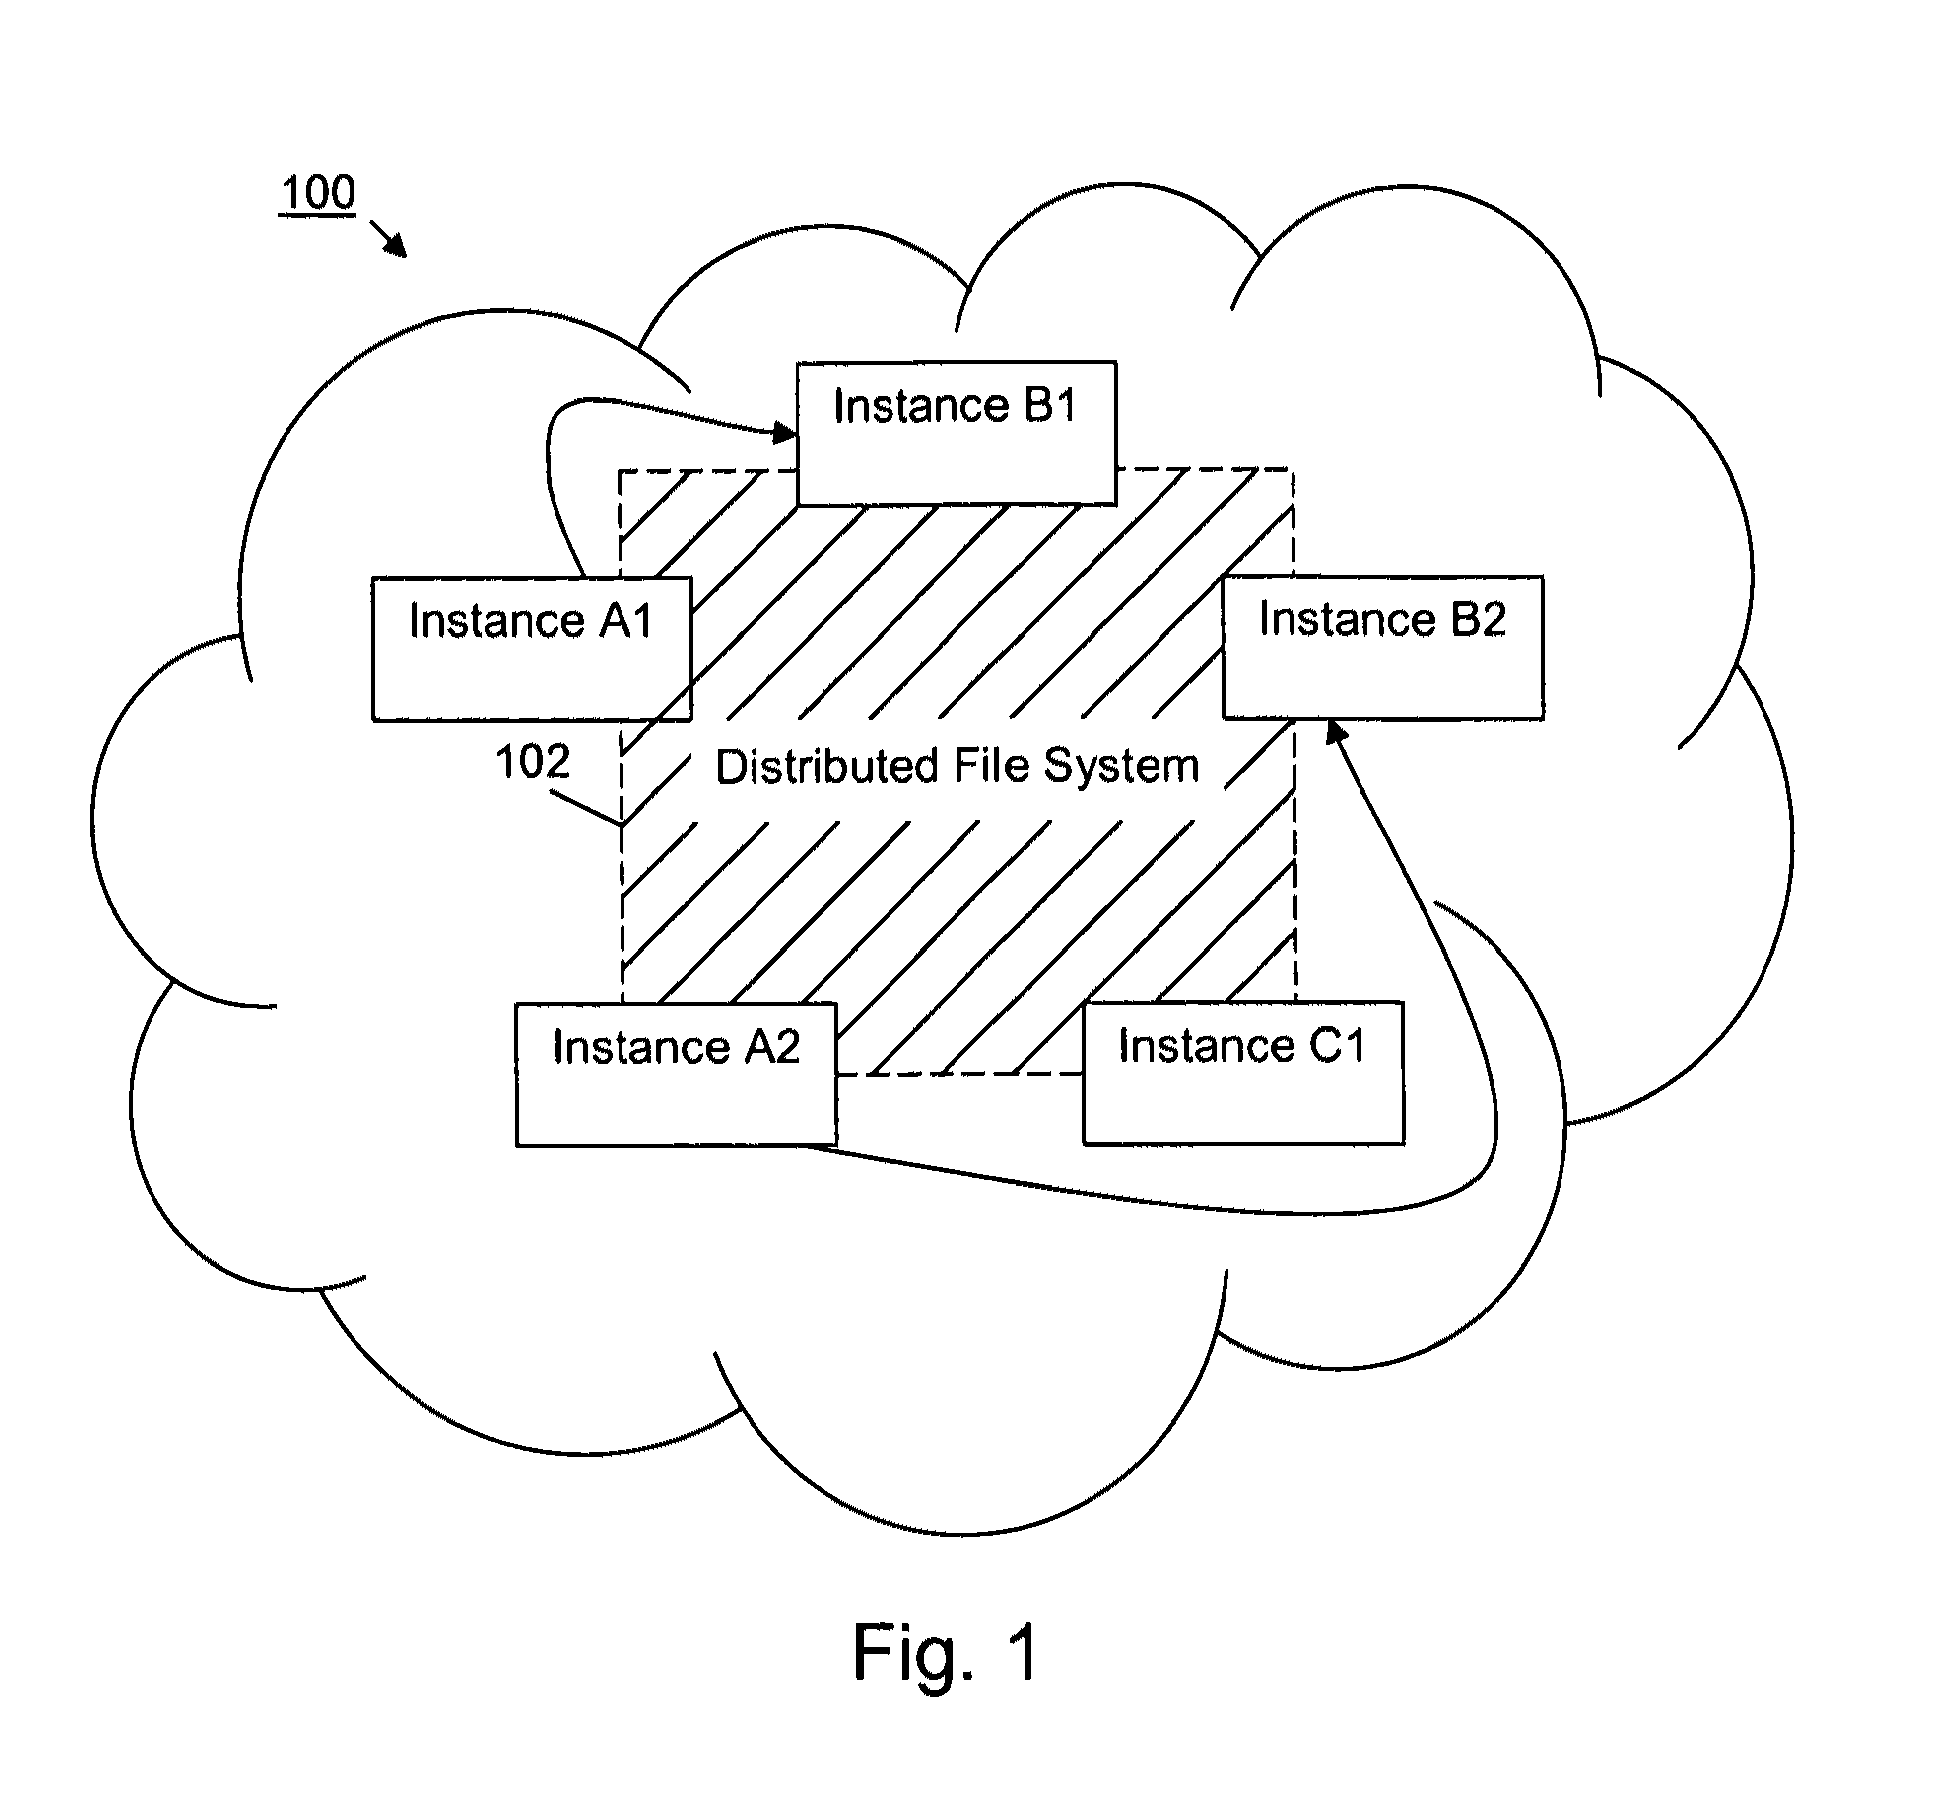 Security systems and/or methods for cloud computing environments